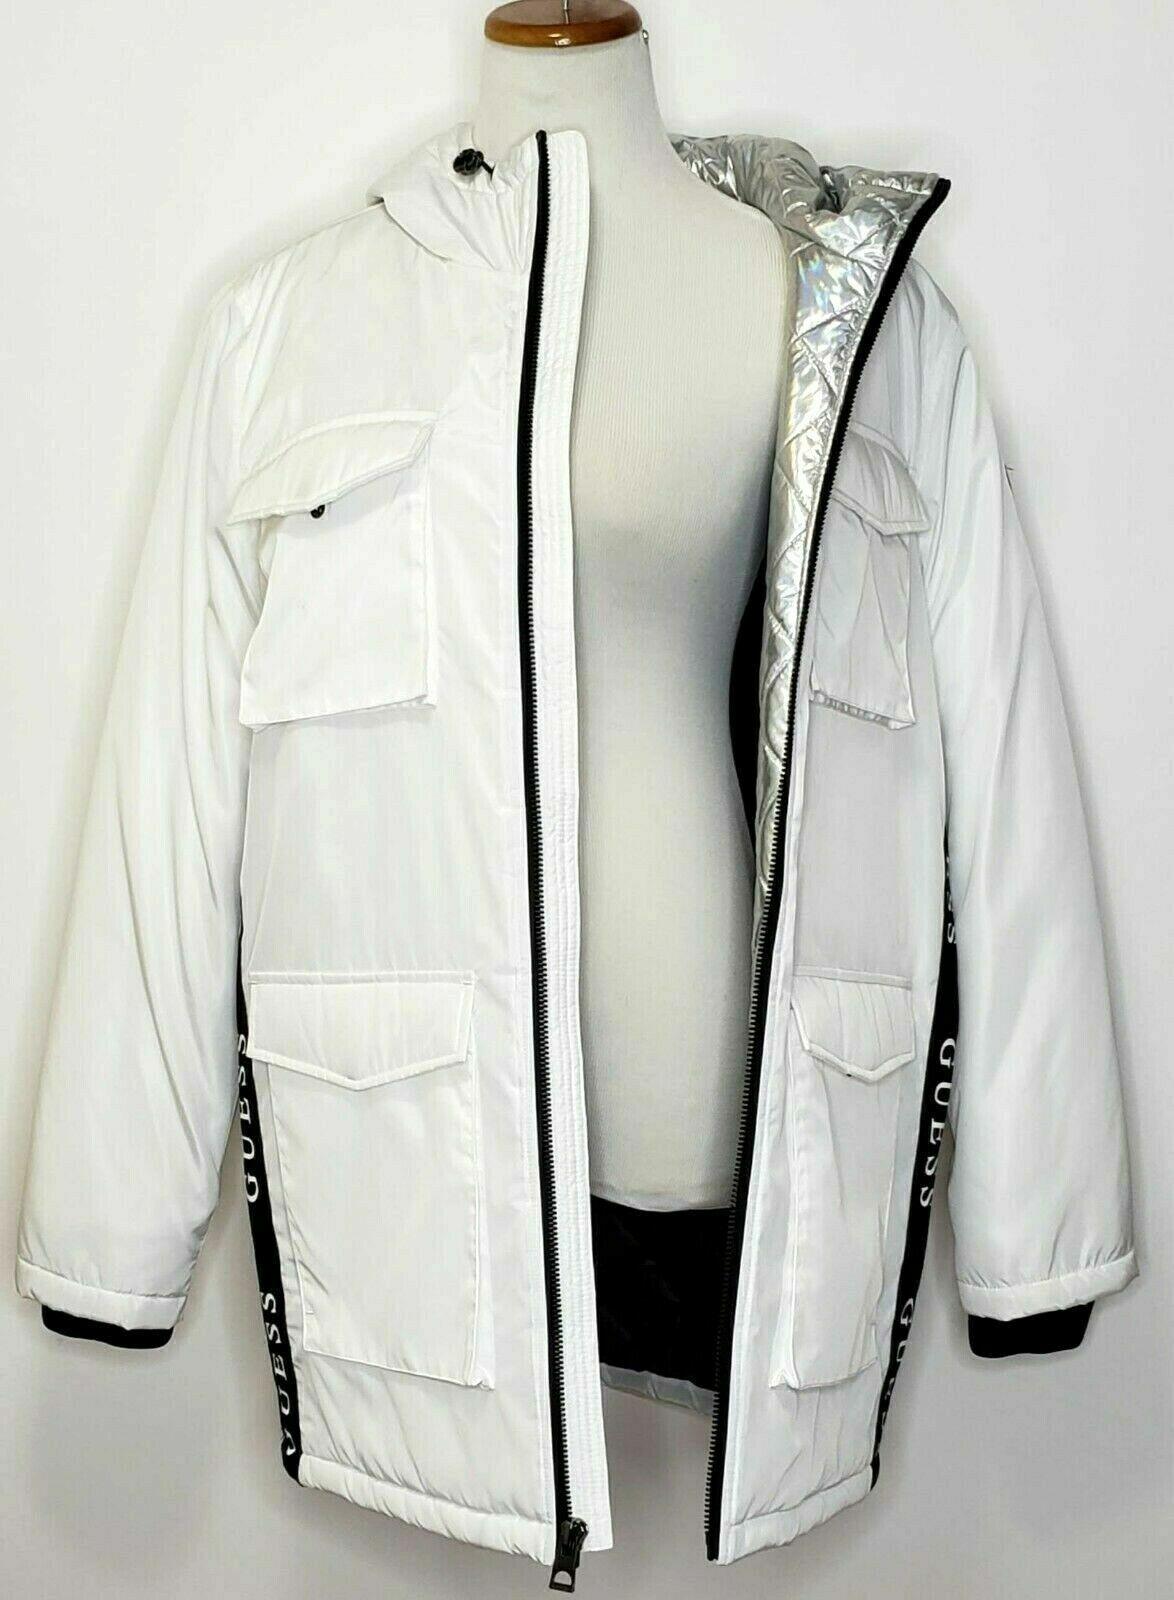 Guess Women's Hooded Winter Oversize Puffer White Coat with Accordion Pockets M - SVNYFancy